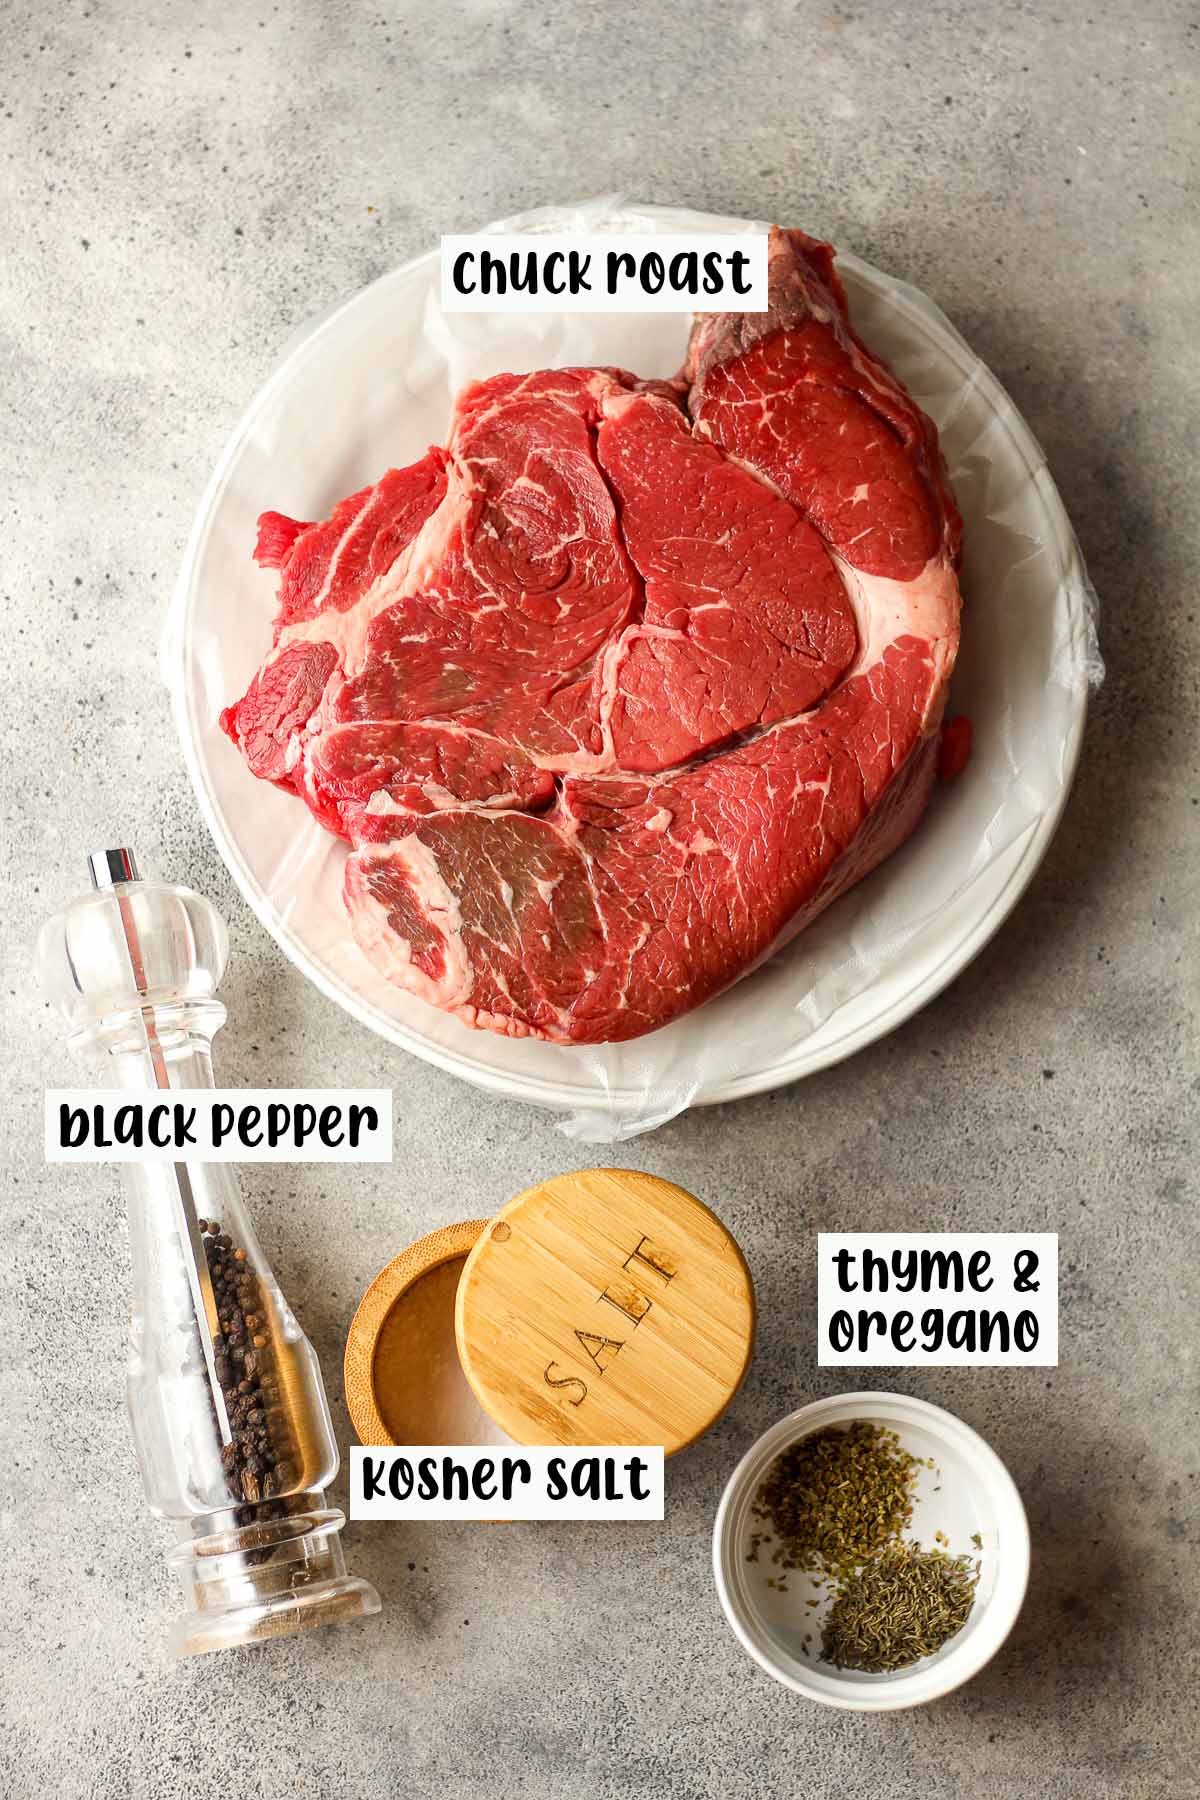 The labeled ingredients for the chuck roast.